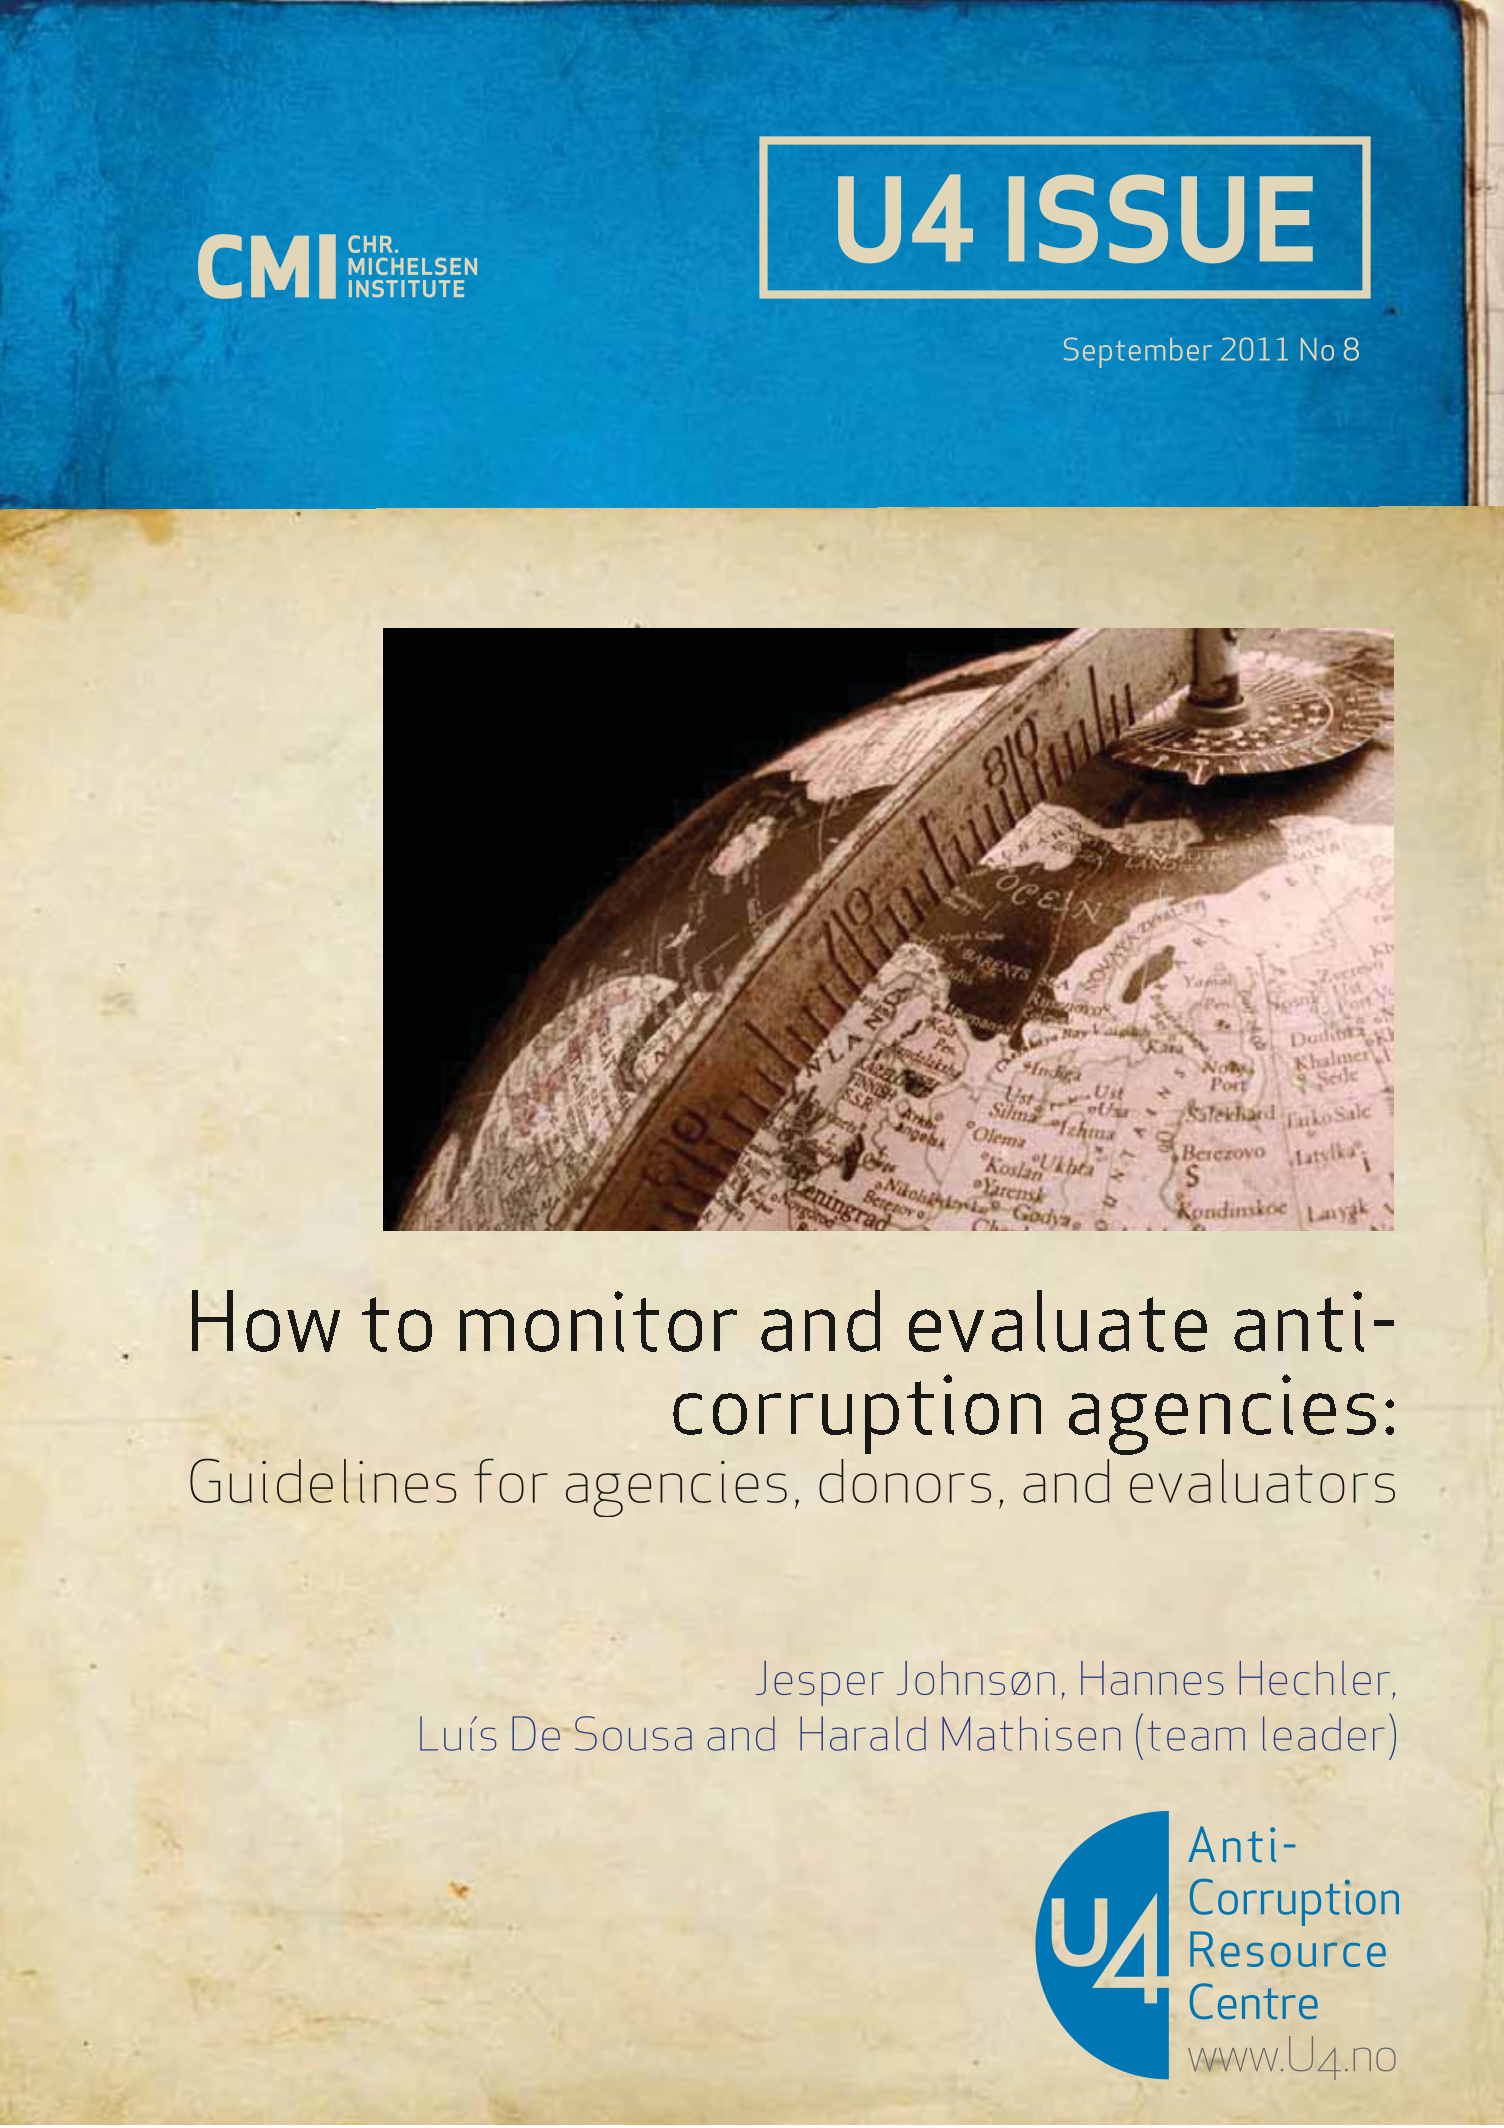 How to monitor and evaluate anti-corruption agencies: Guidelines for agencies, donors, and evaluators